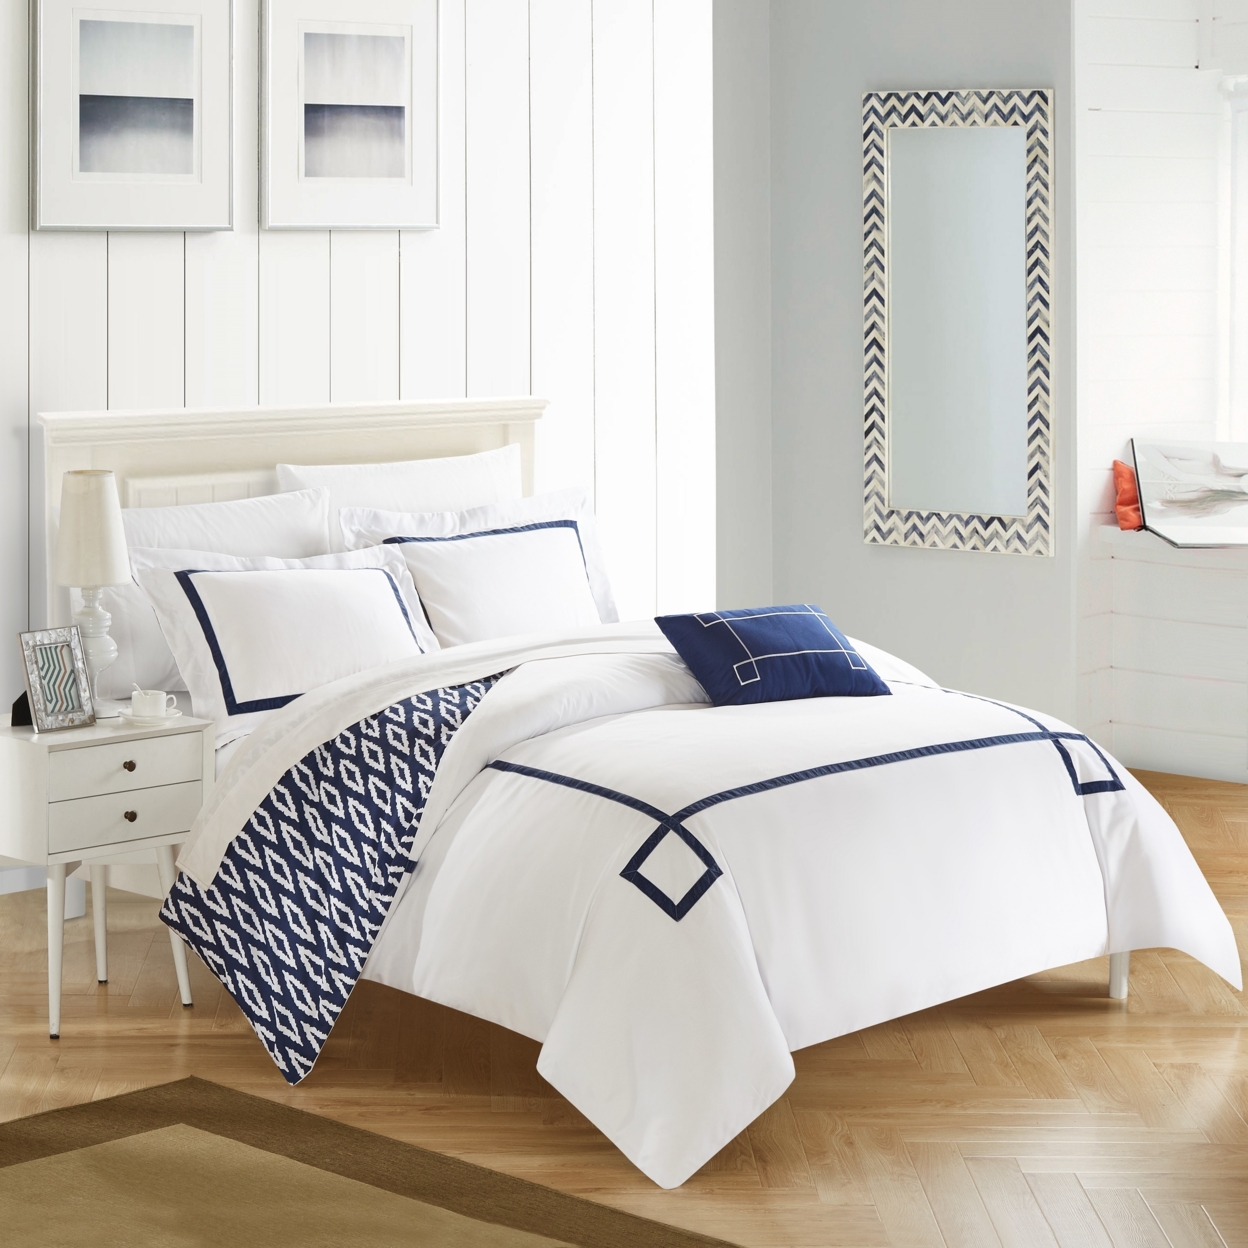 3/4 Piece Berwin Embroidered REVERSIBLE Duvet Cover Set With Shams And Decorative Pillows Included - Navy, King